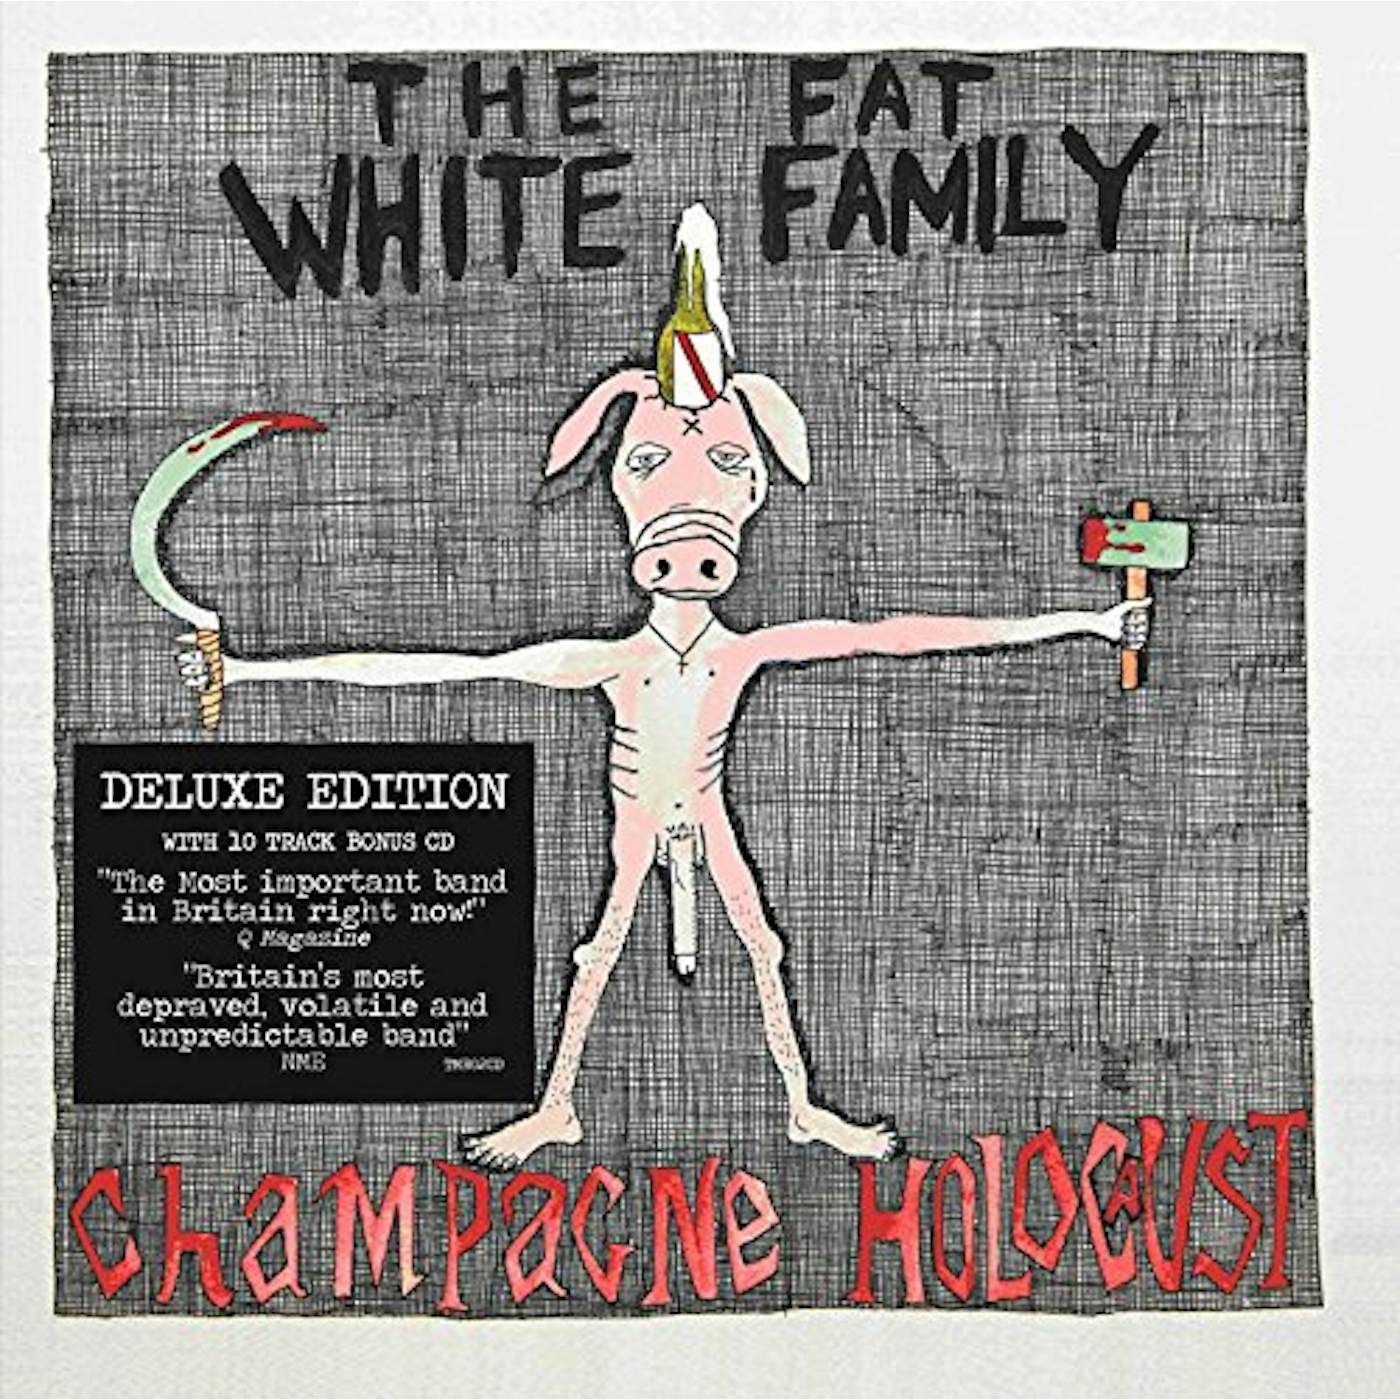 Fat White Family CHAMPAGNE HOLOCAUST: DELUXE EDITION CD